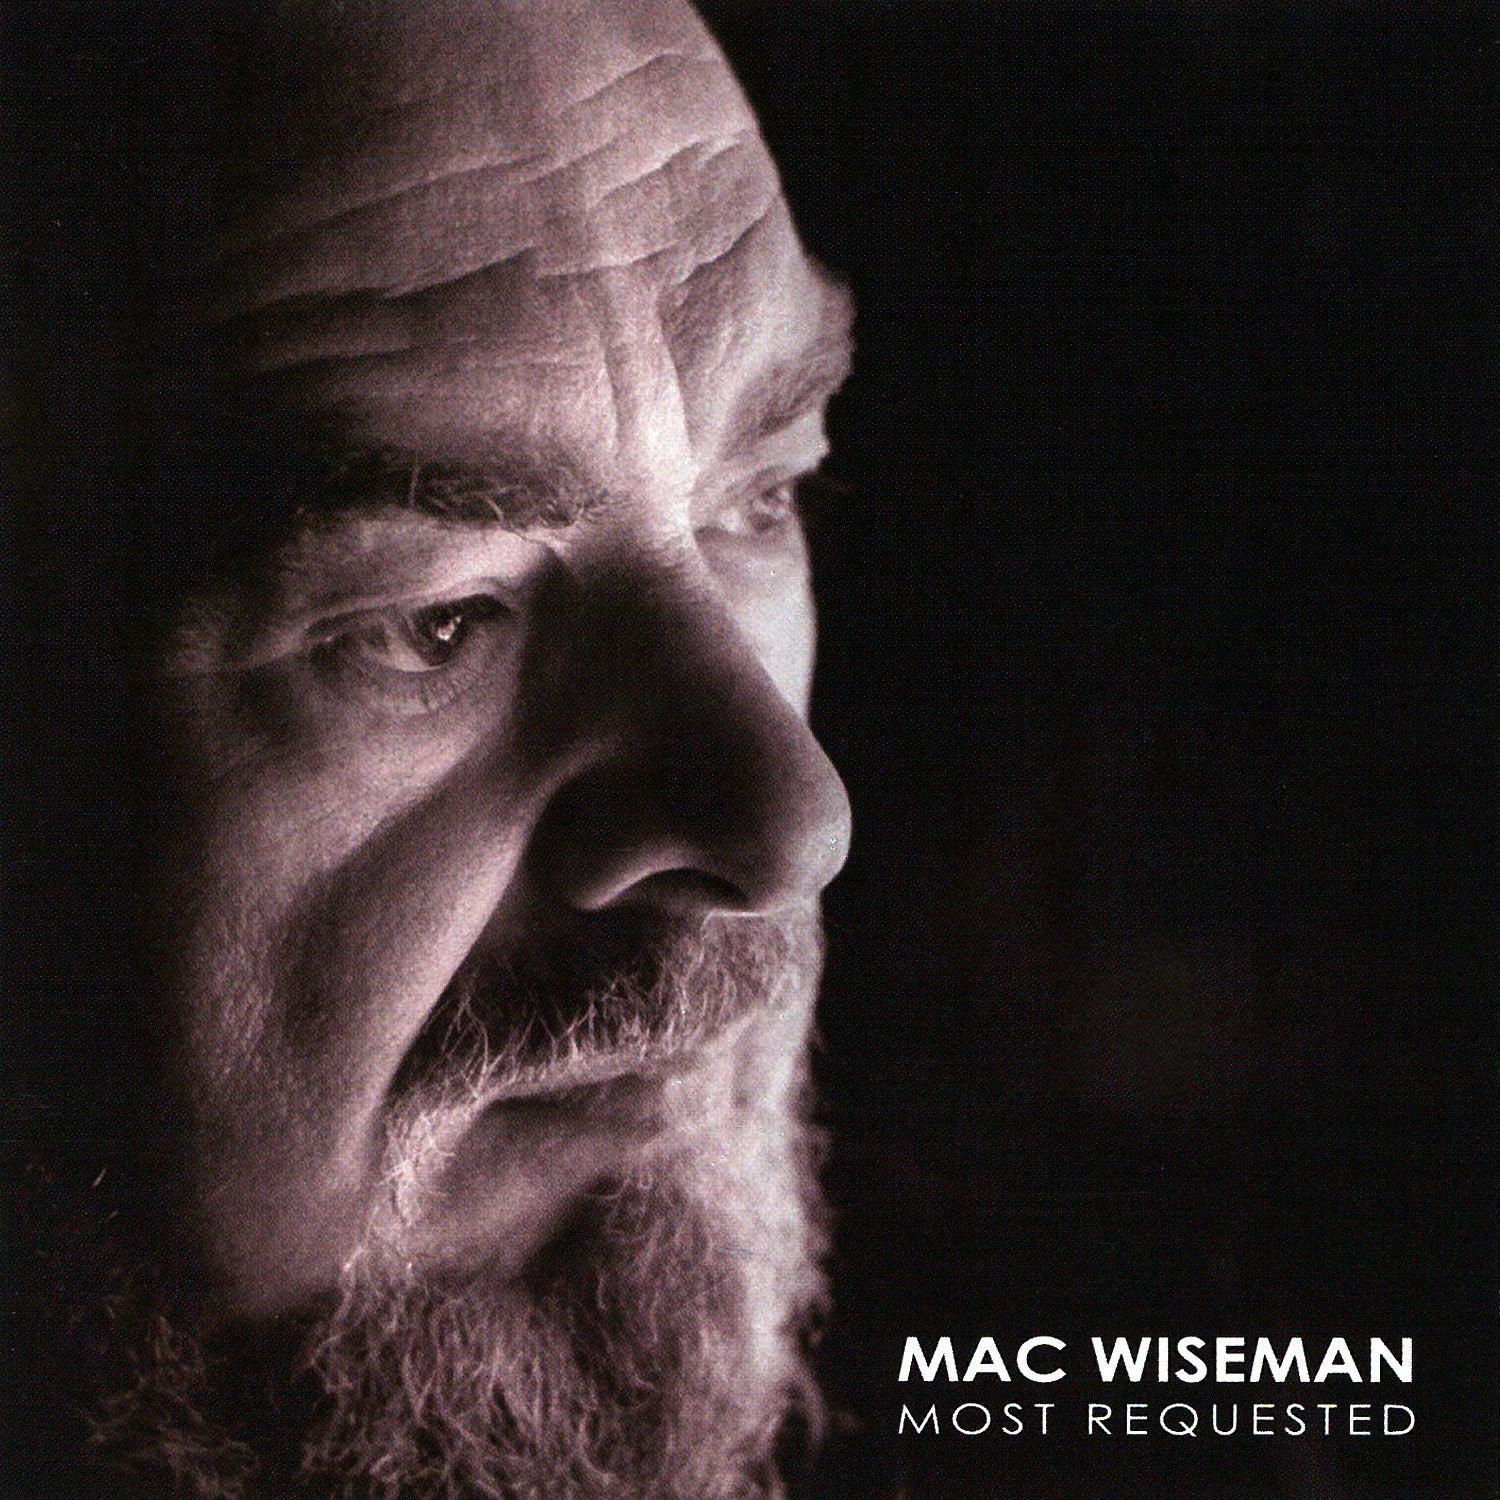 Mac Wiseman: Most Requested